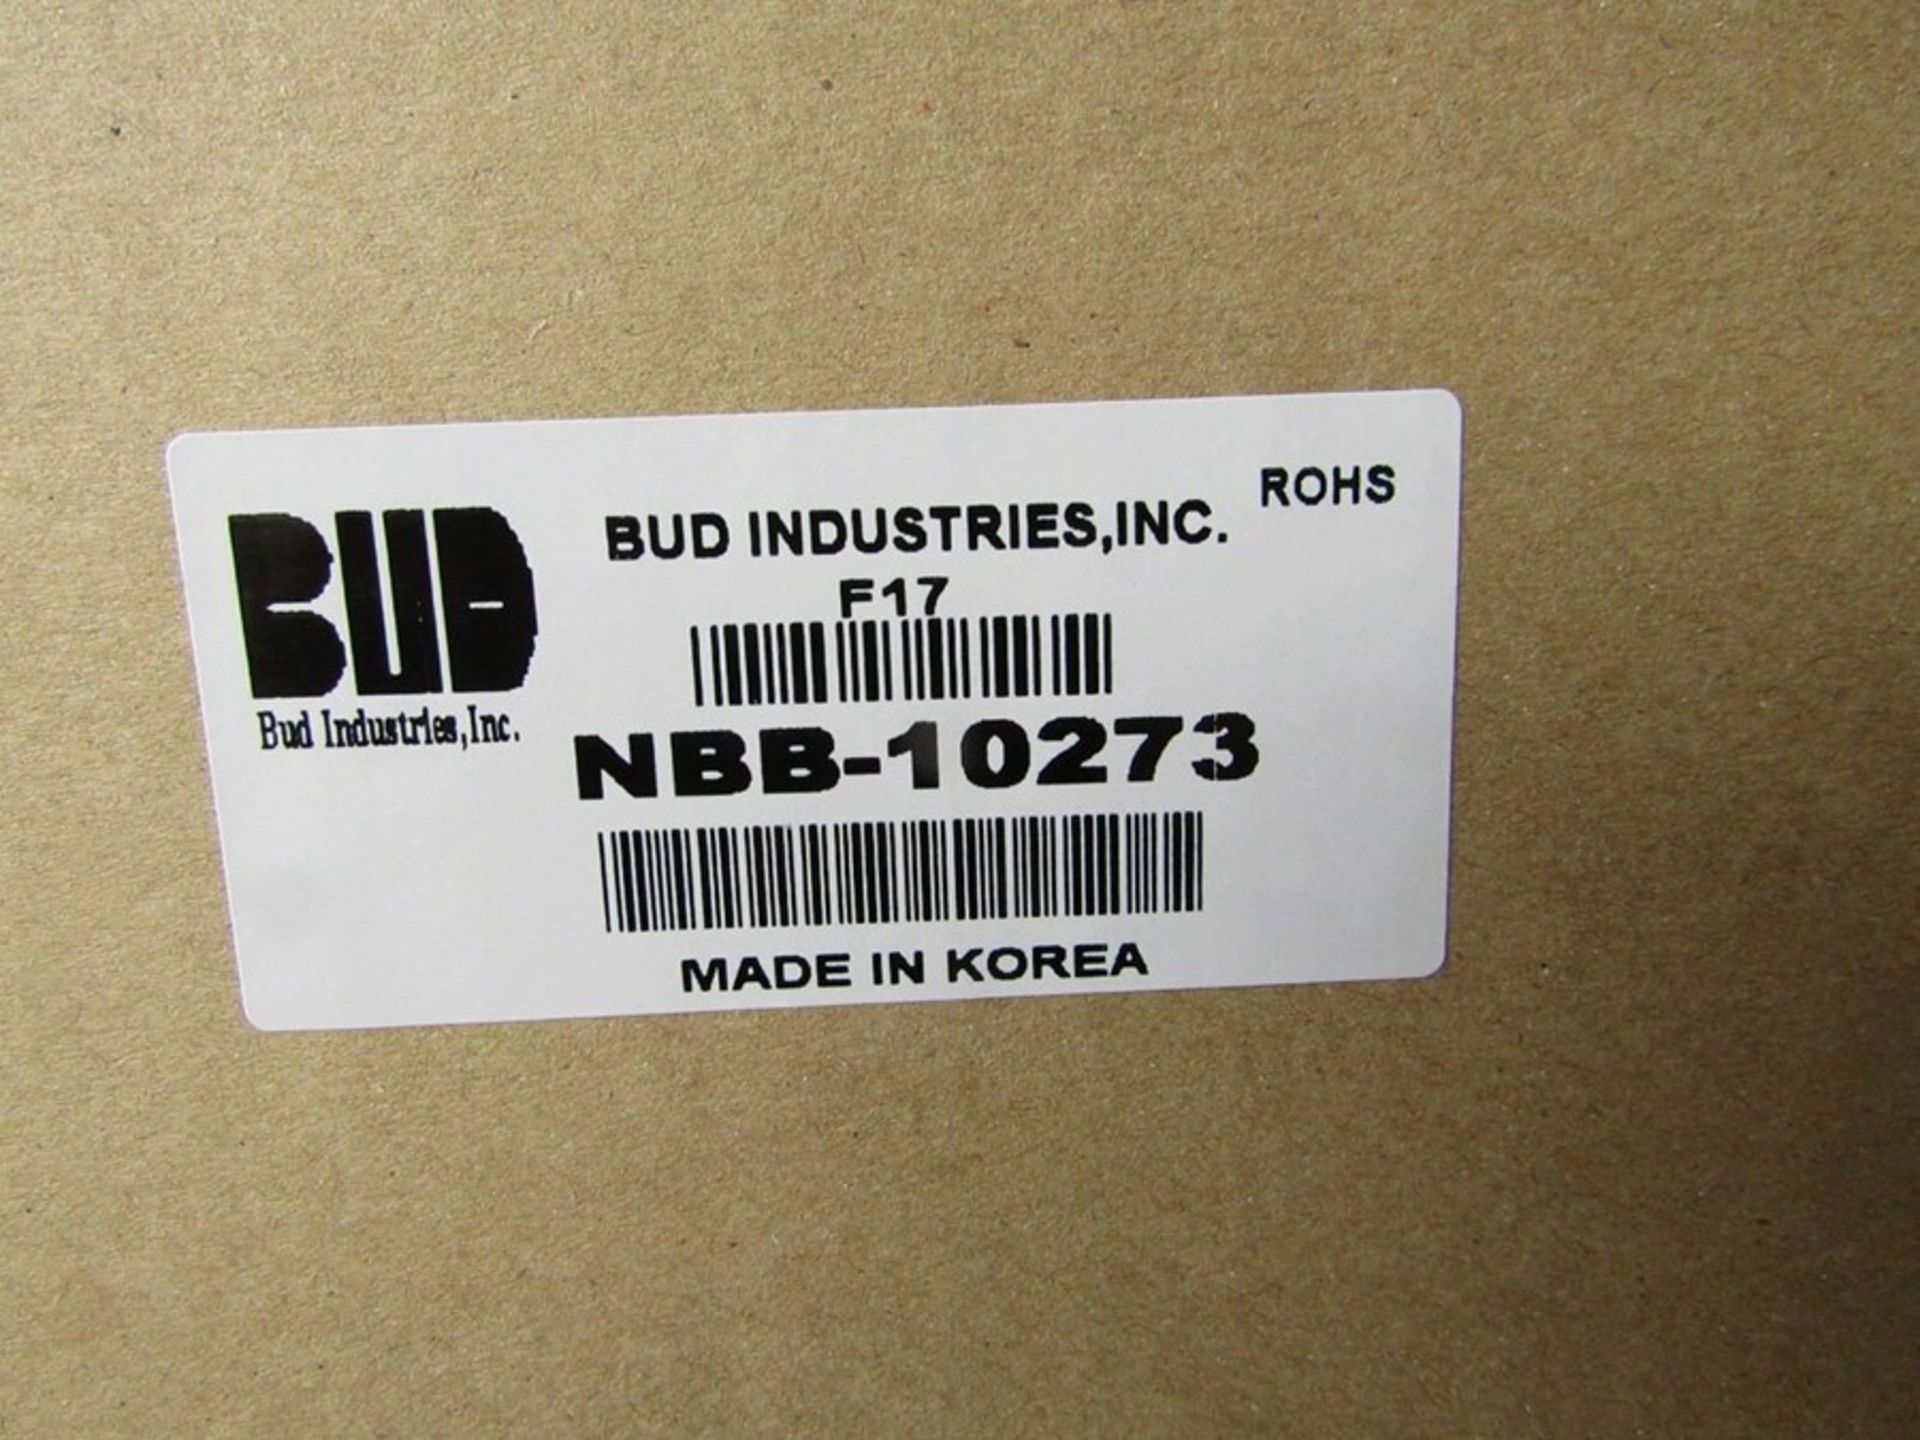 BUD NBB Latch Wall Box, ABS, PC, Grey, 486.9 x 371.9 x 199.4mm - H7M 1121966 - Image 2 of 2